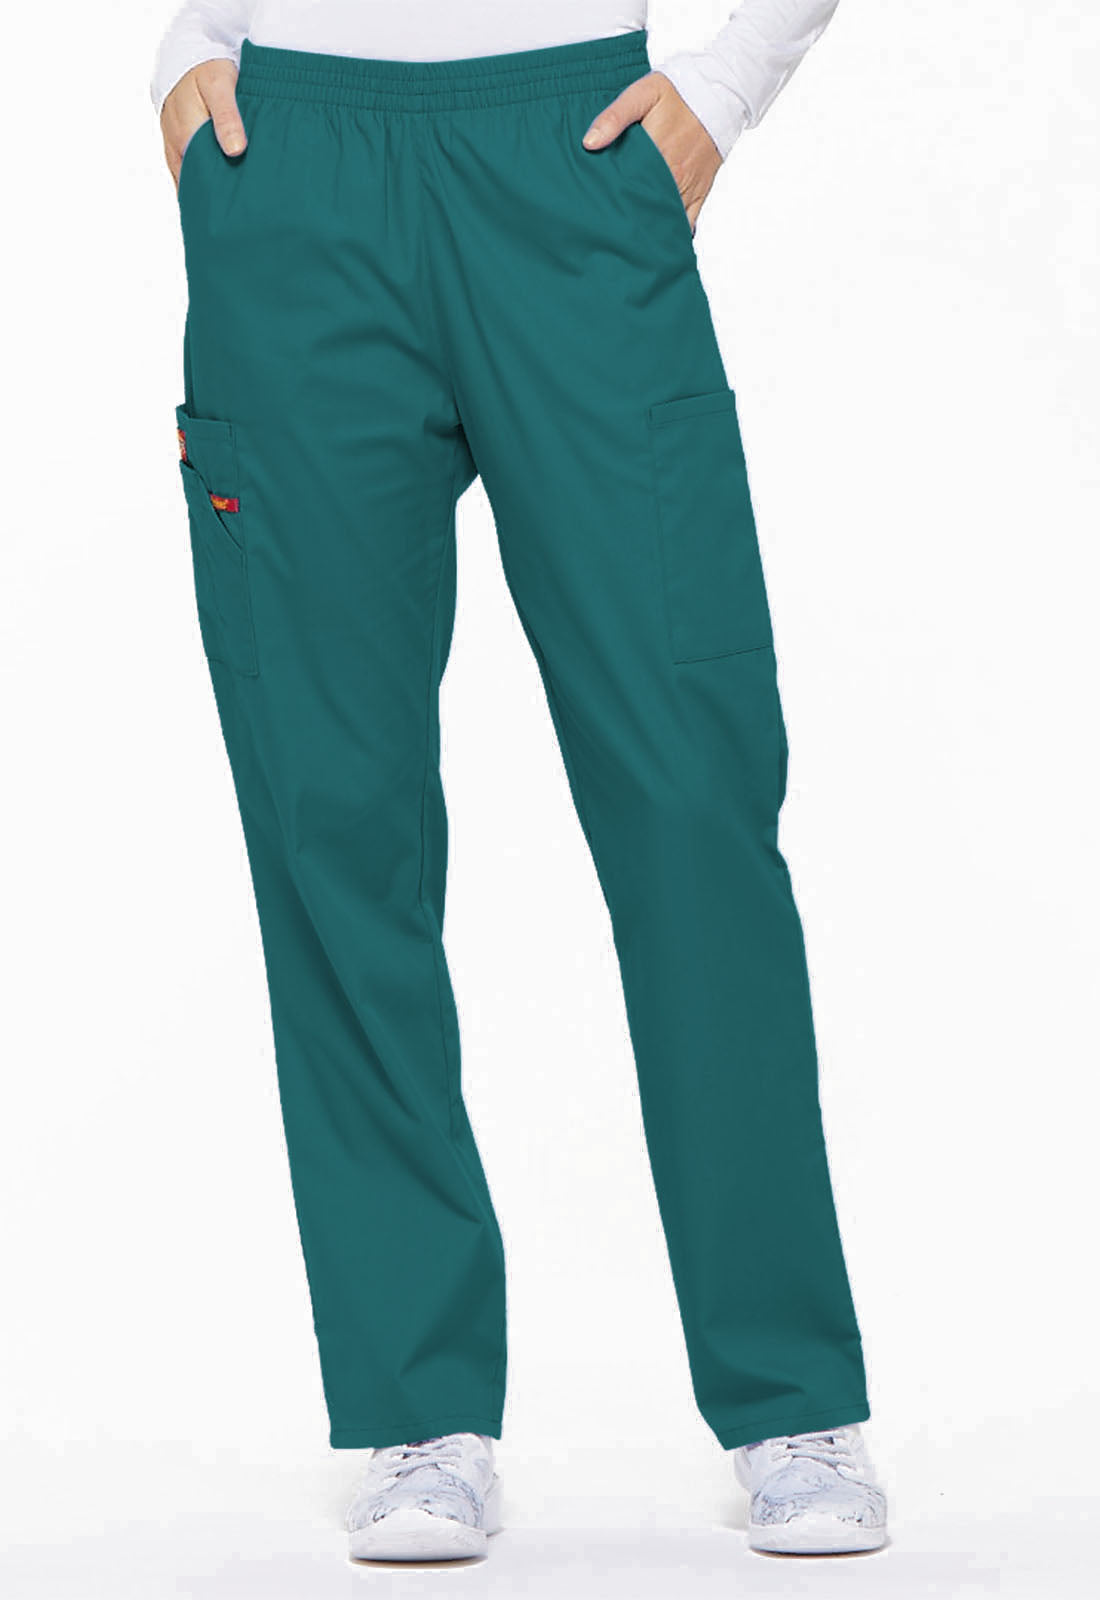 Exist. Conjunto Mujer Dickies EDS Signature Mod.86806/86106 Teal